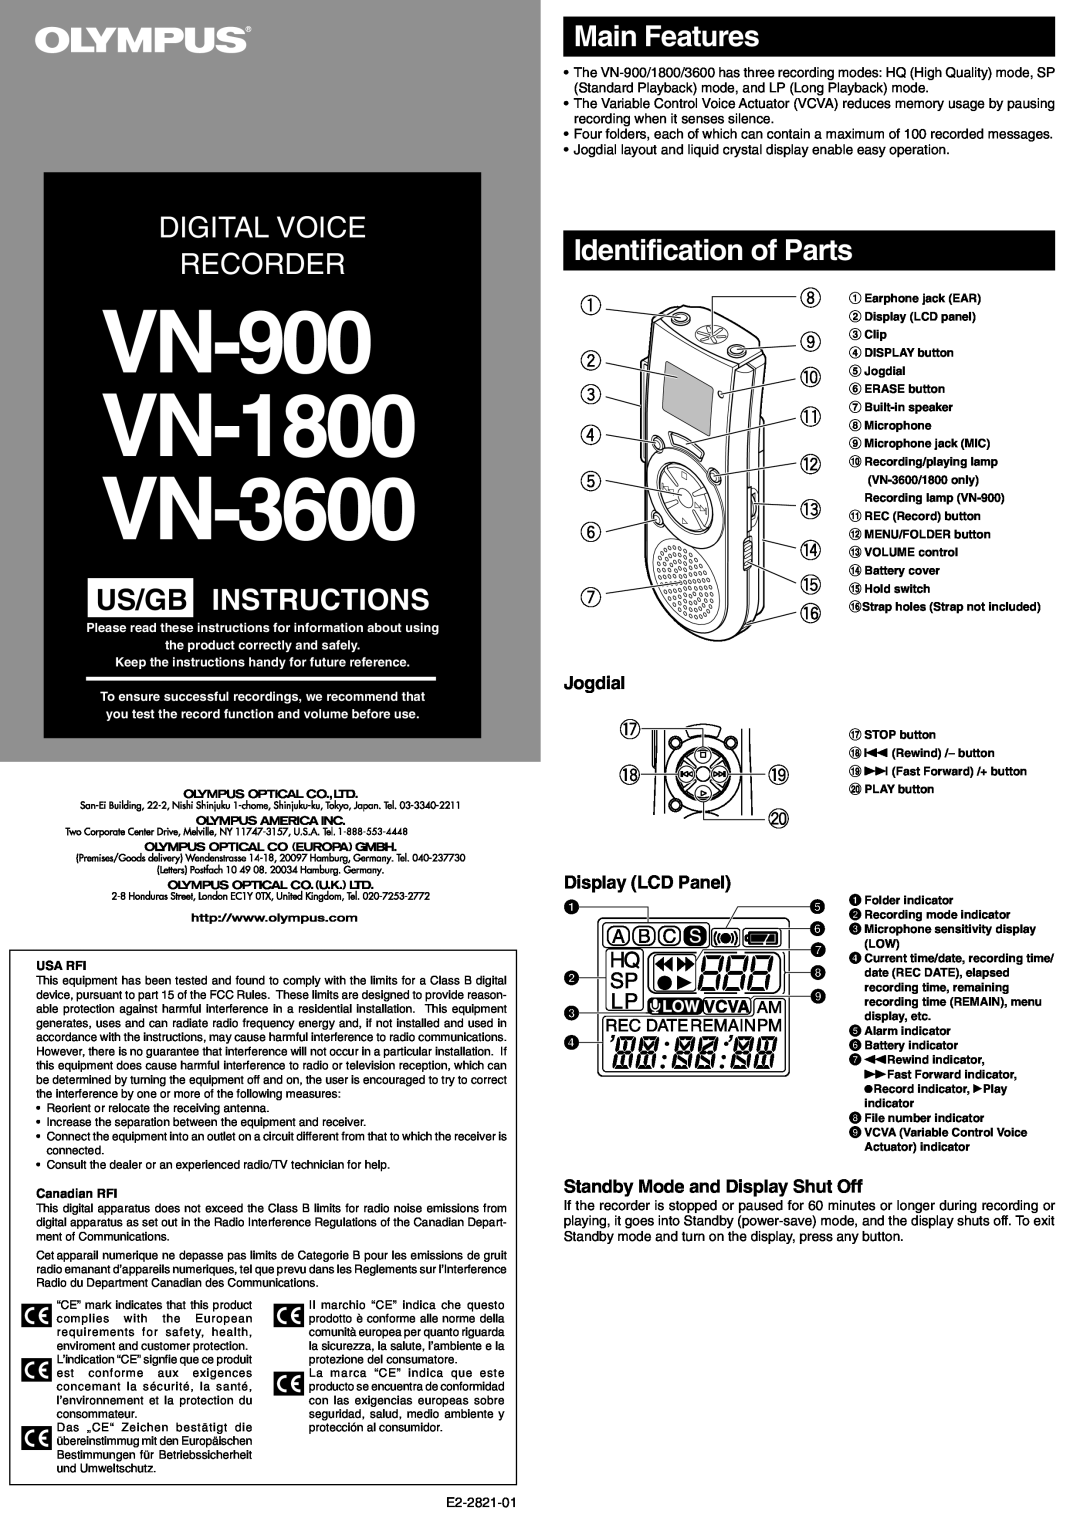 Olympus VN-1800, VN-3600 manual Us/Gb Instructions, Main Features, Identification of Parts, Jogdial, Display LCD Panel 